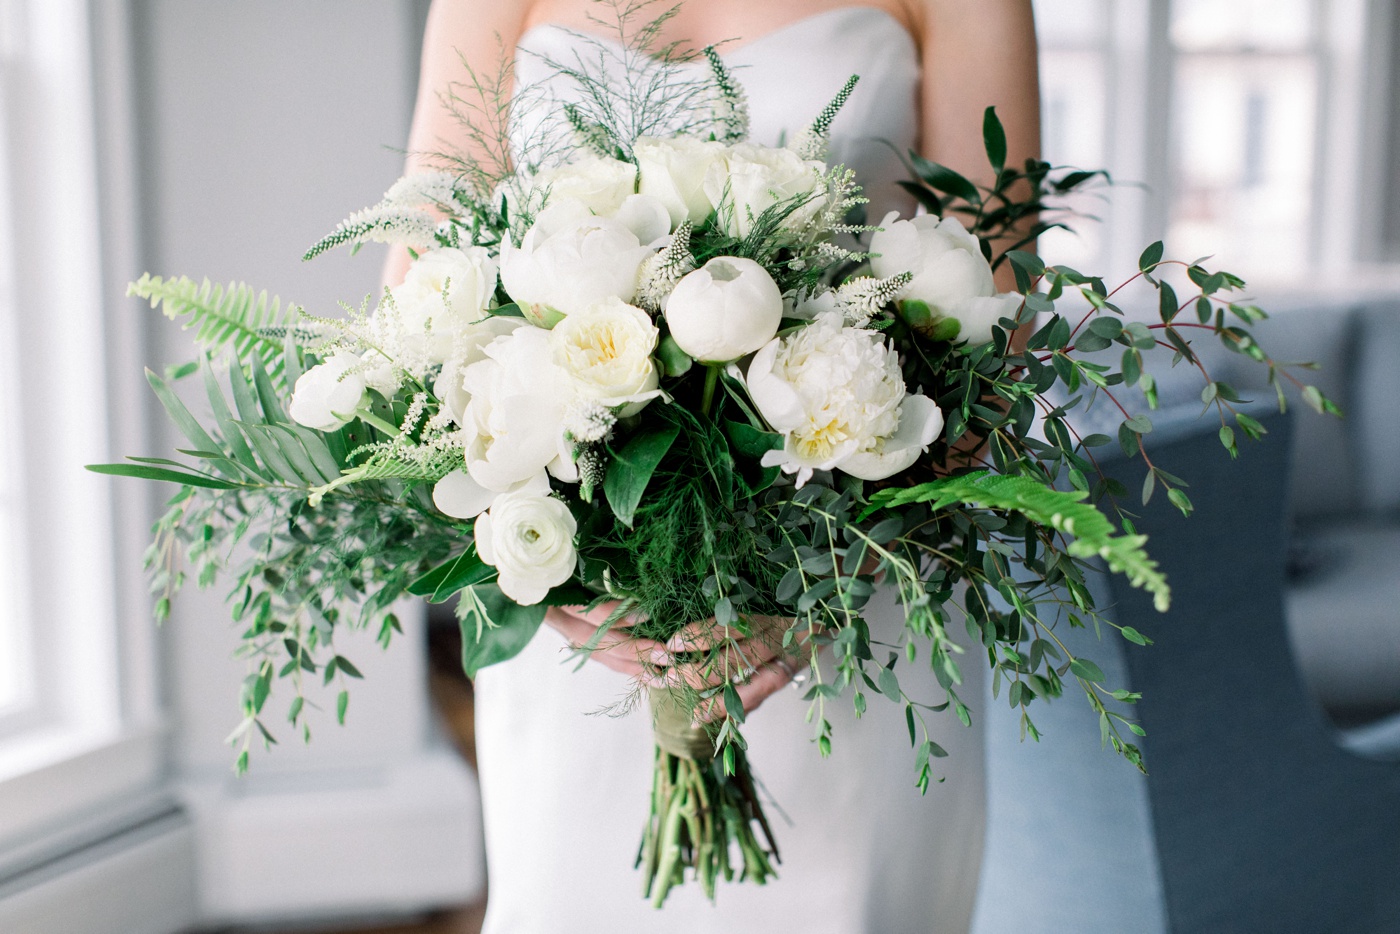 A bridal bouquet filled with white peonies and greenery by Awesome Blossom